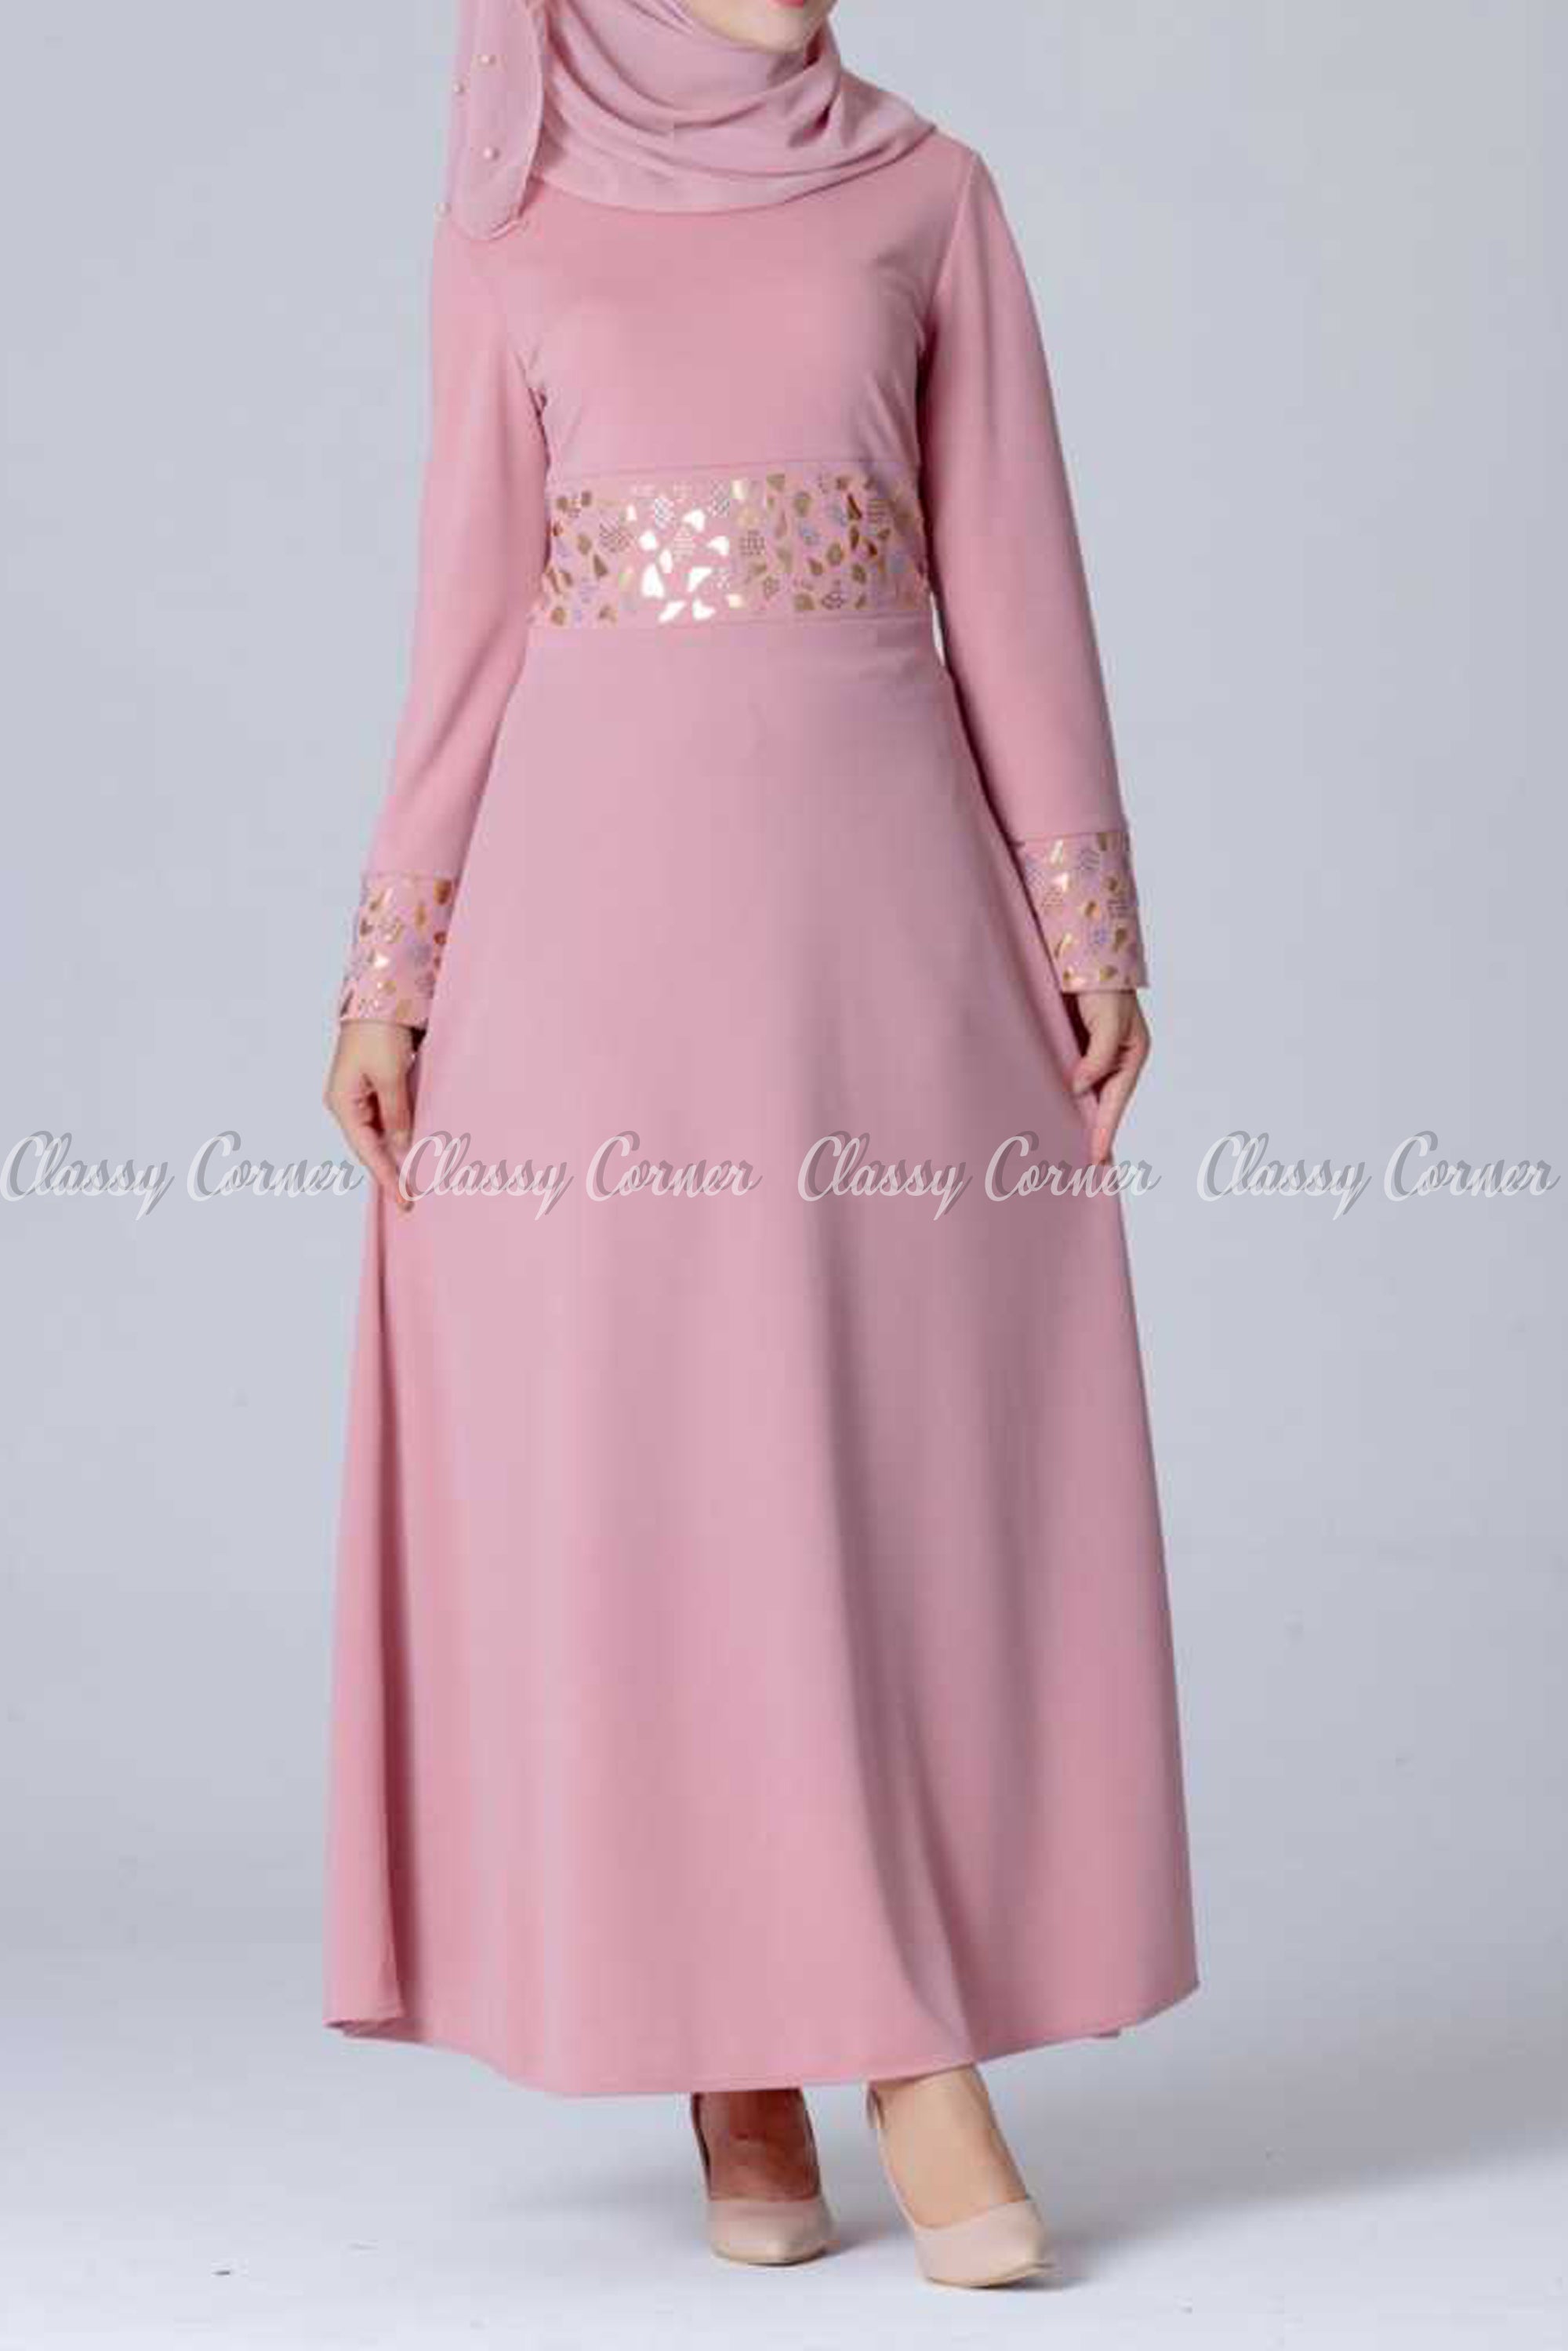 Gold and Silver Design Pink Modest Long Dress